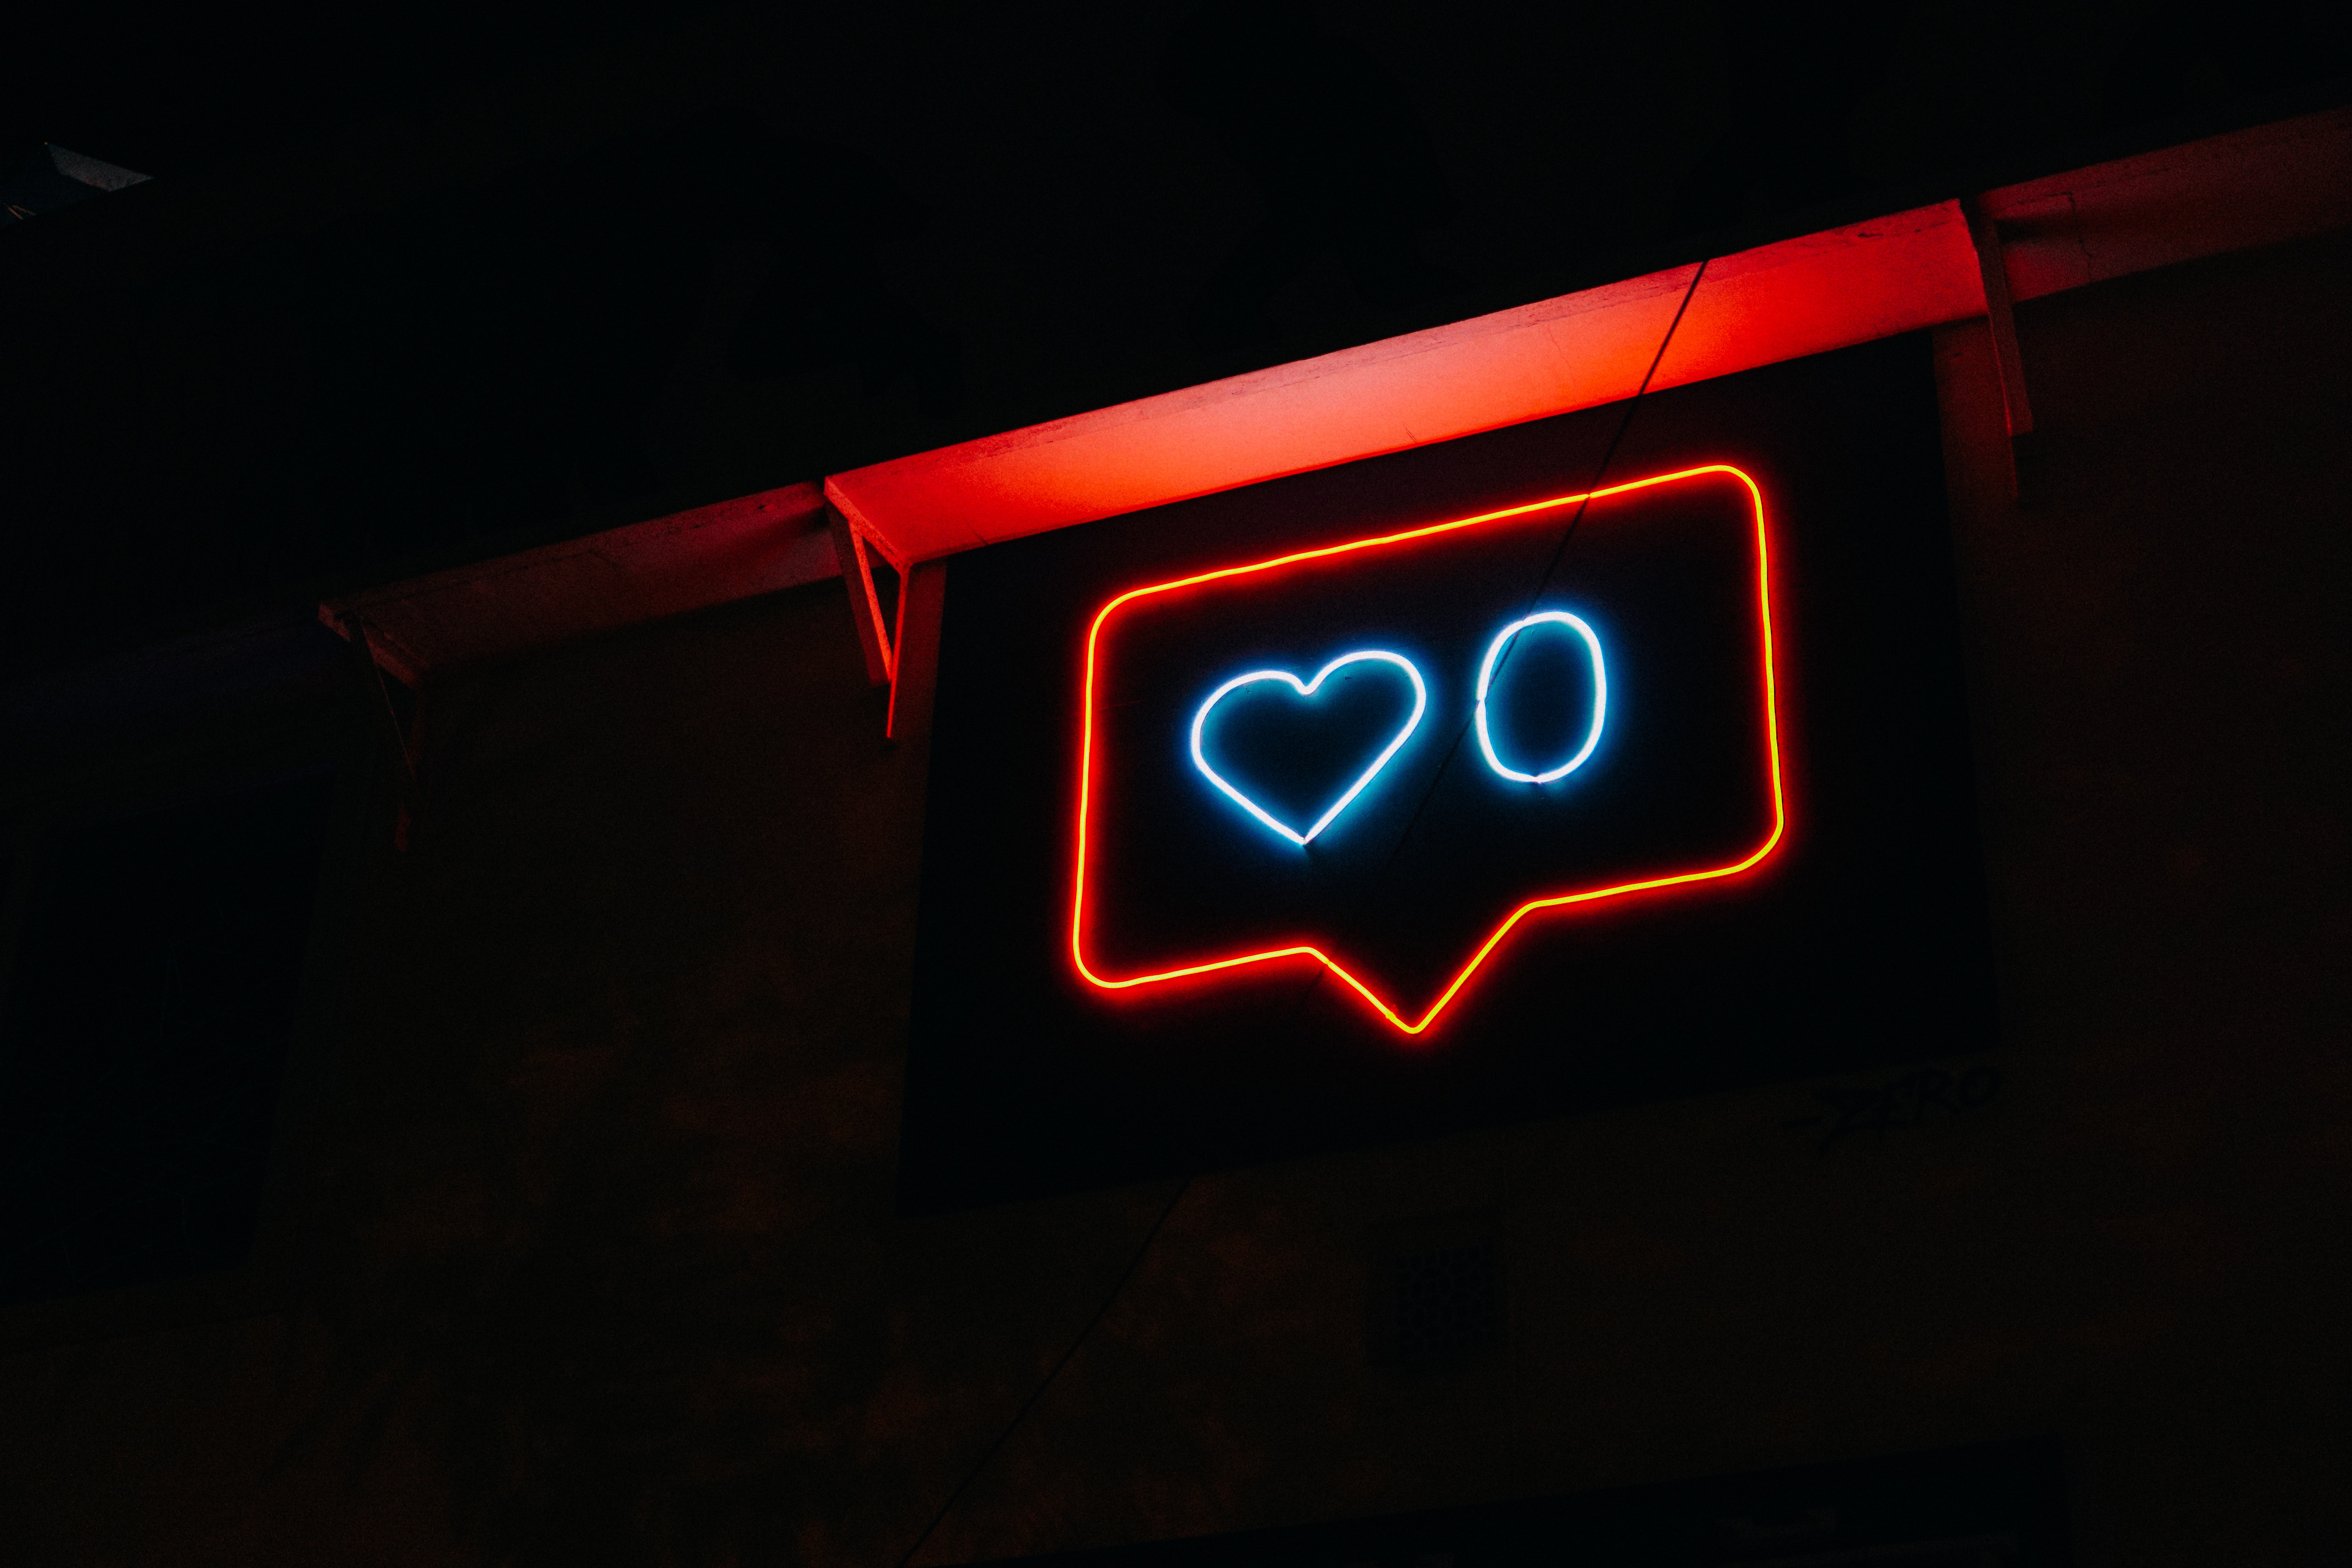  A neon sign showing a like count similar to social media platforms